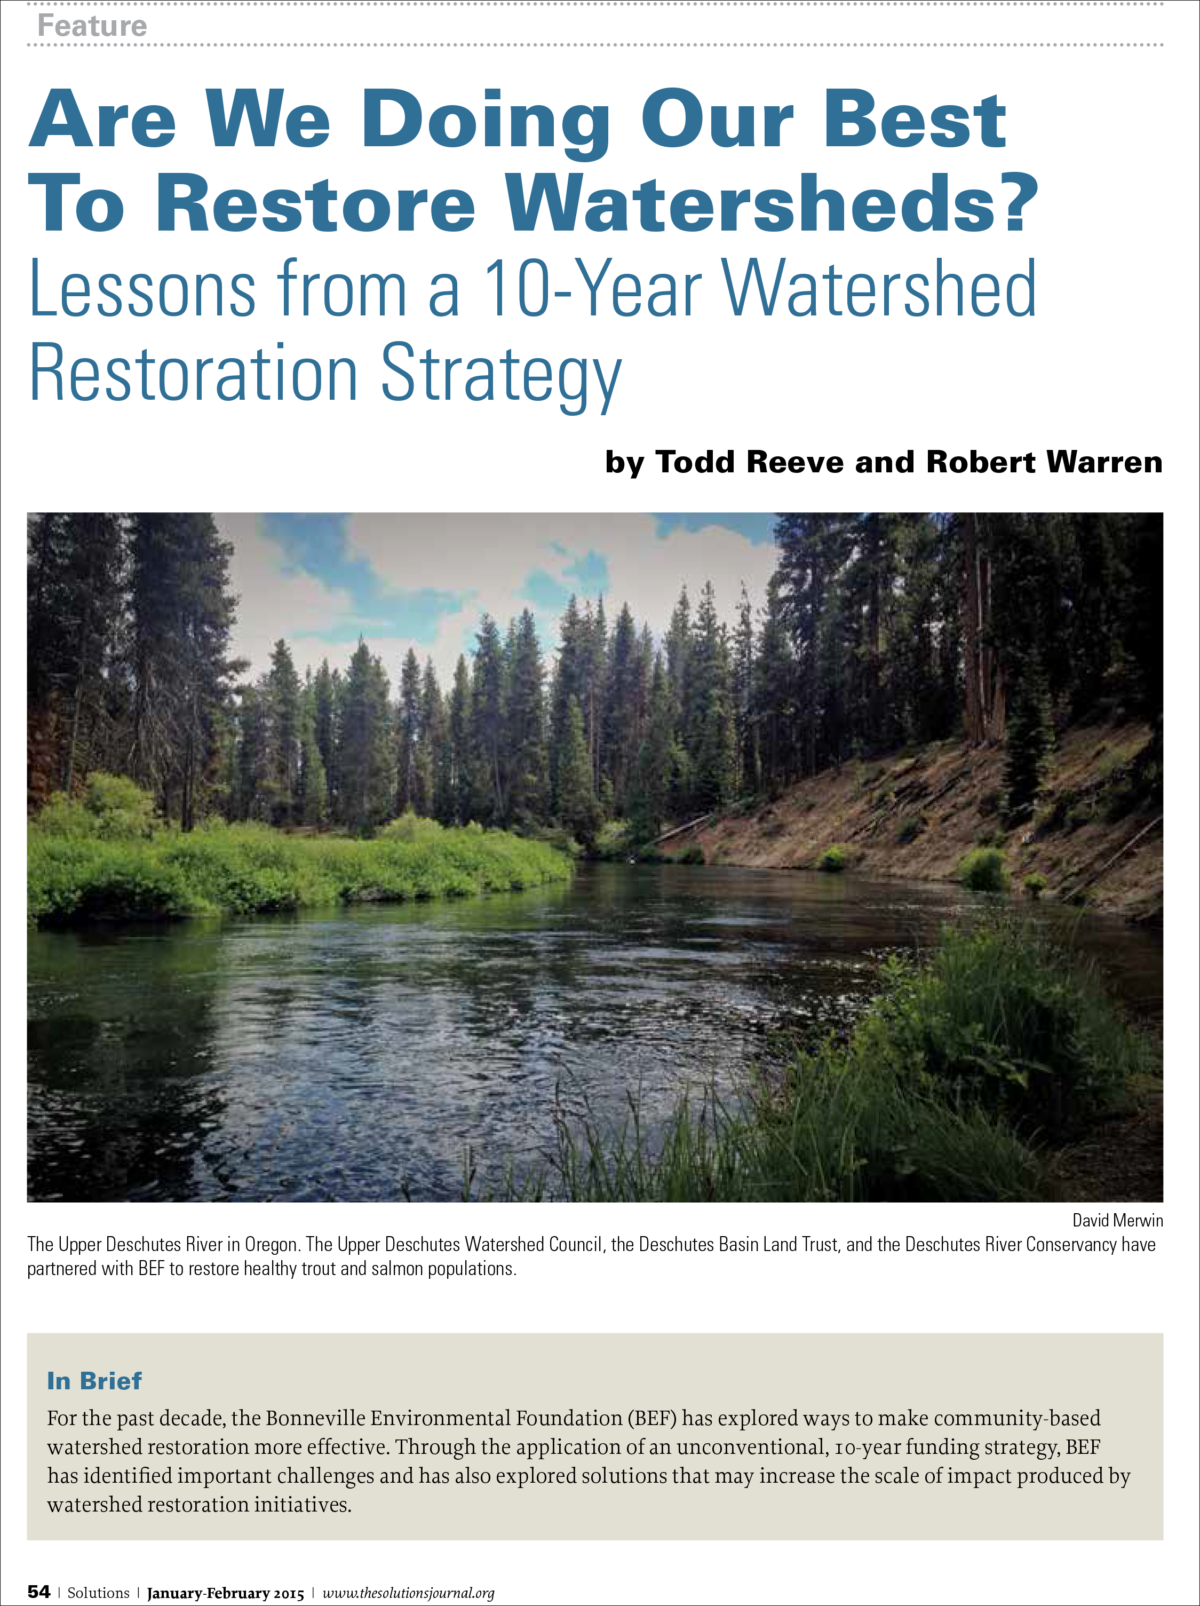 BEF Solutions Article: Are we doing our best to restore watersheds? Lessons from a 10-year watershed restoration strategy.